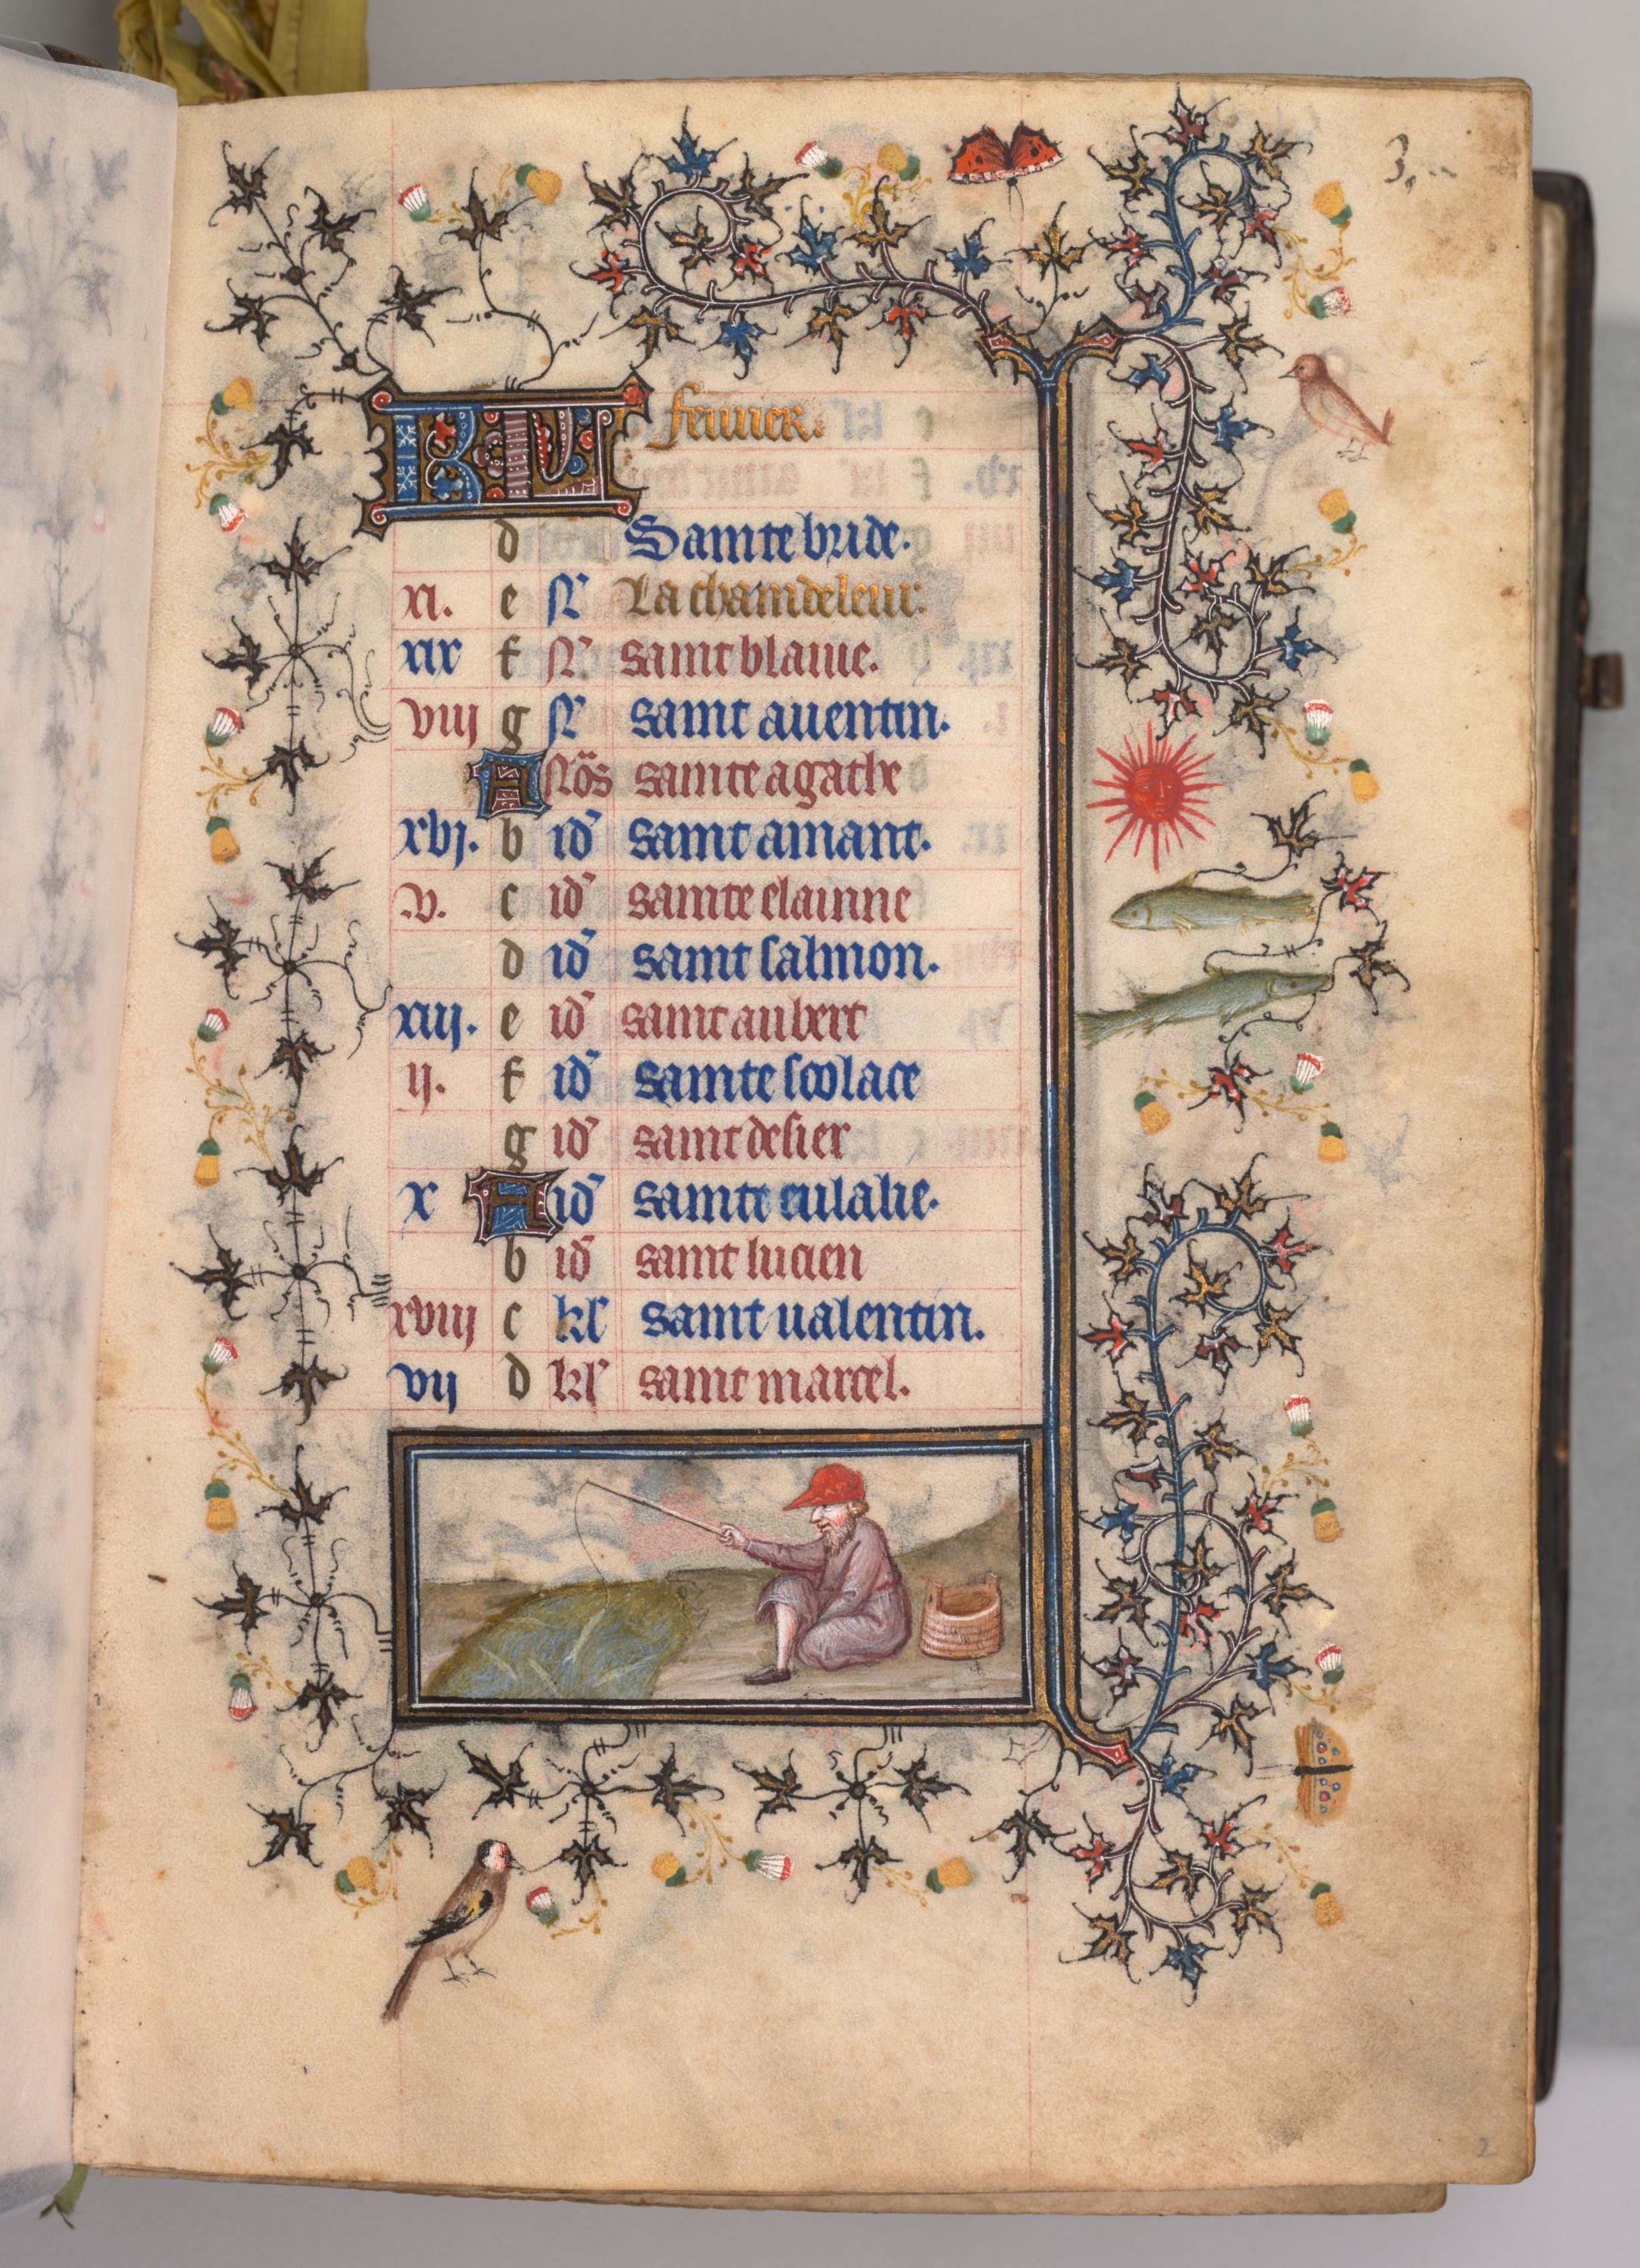 Hours of Charles the Noble, King of Navarre (1361-1425): fol. 2r, February